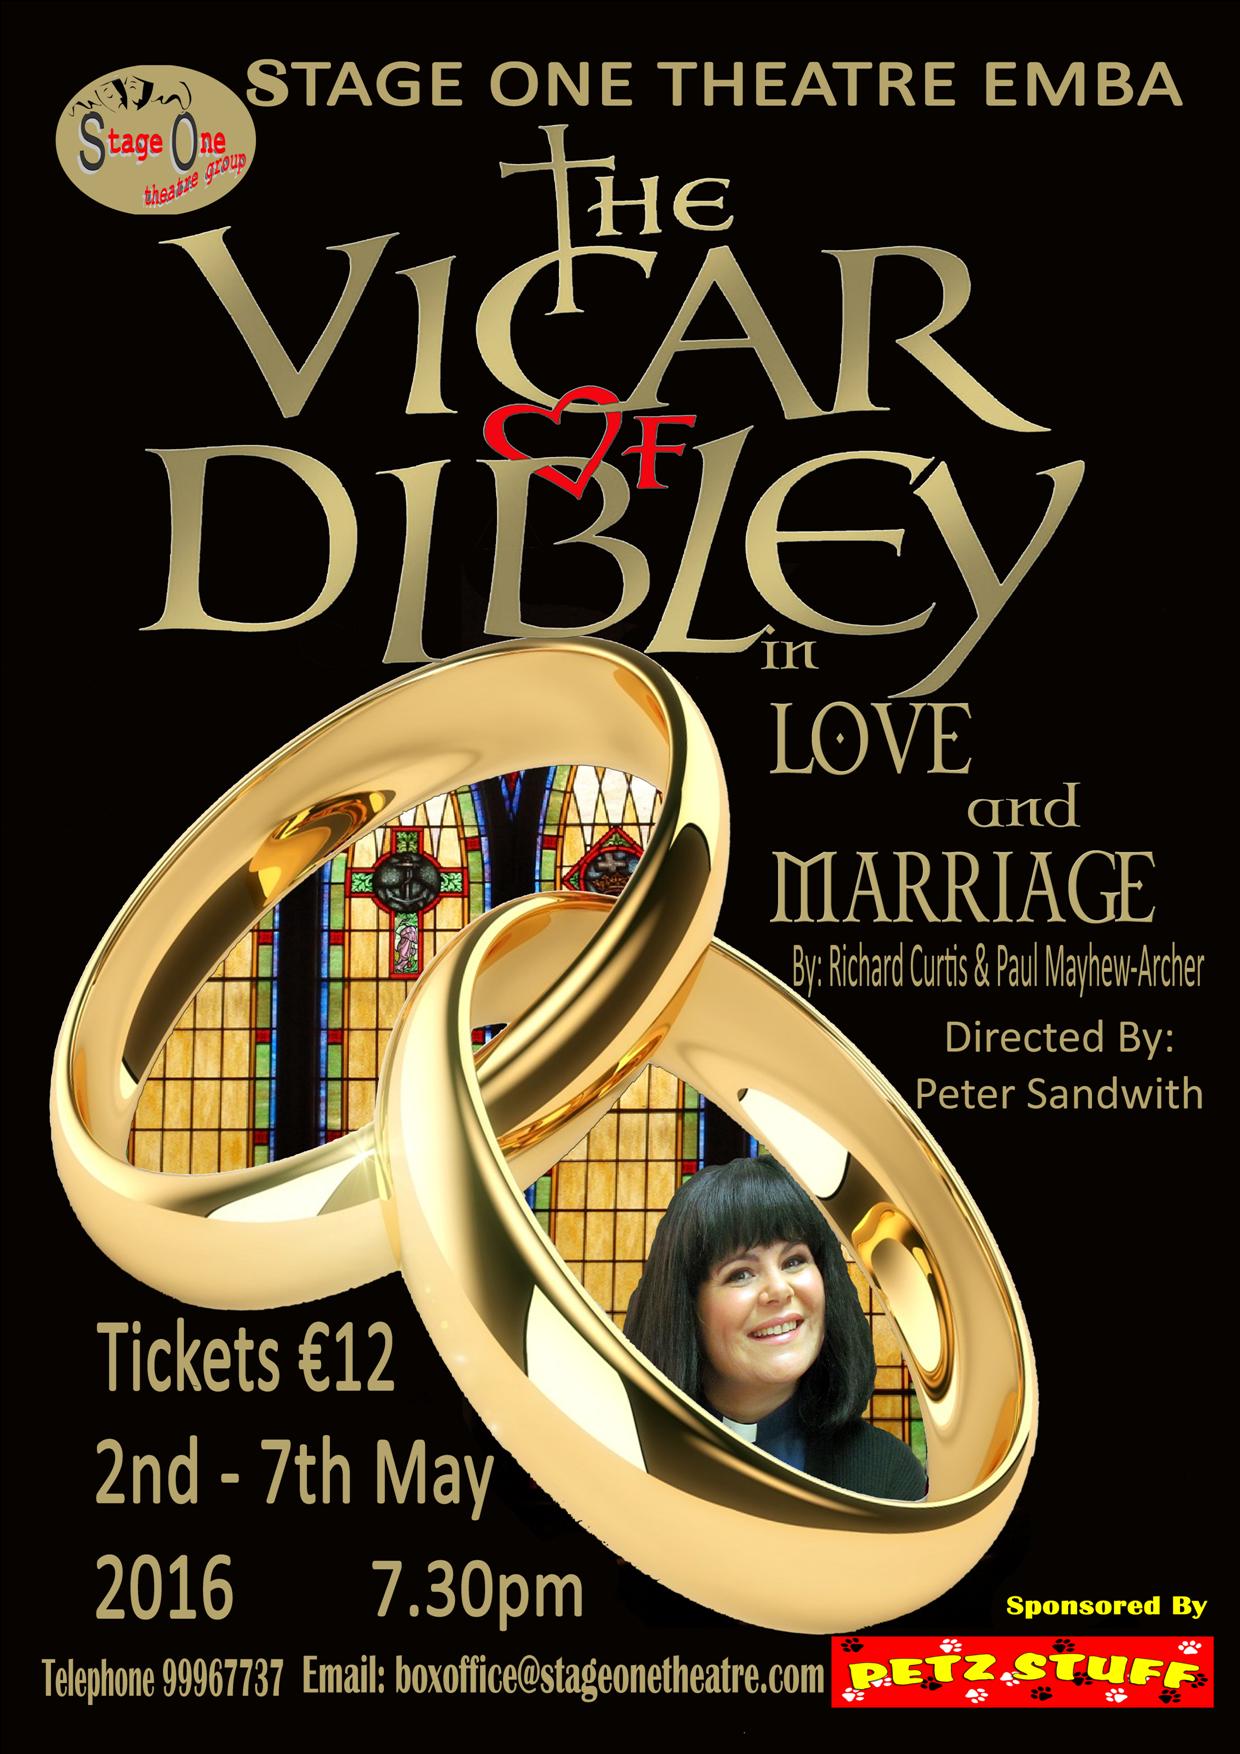 The Vicar of Dibley in Love and Marriage